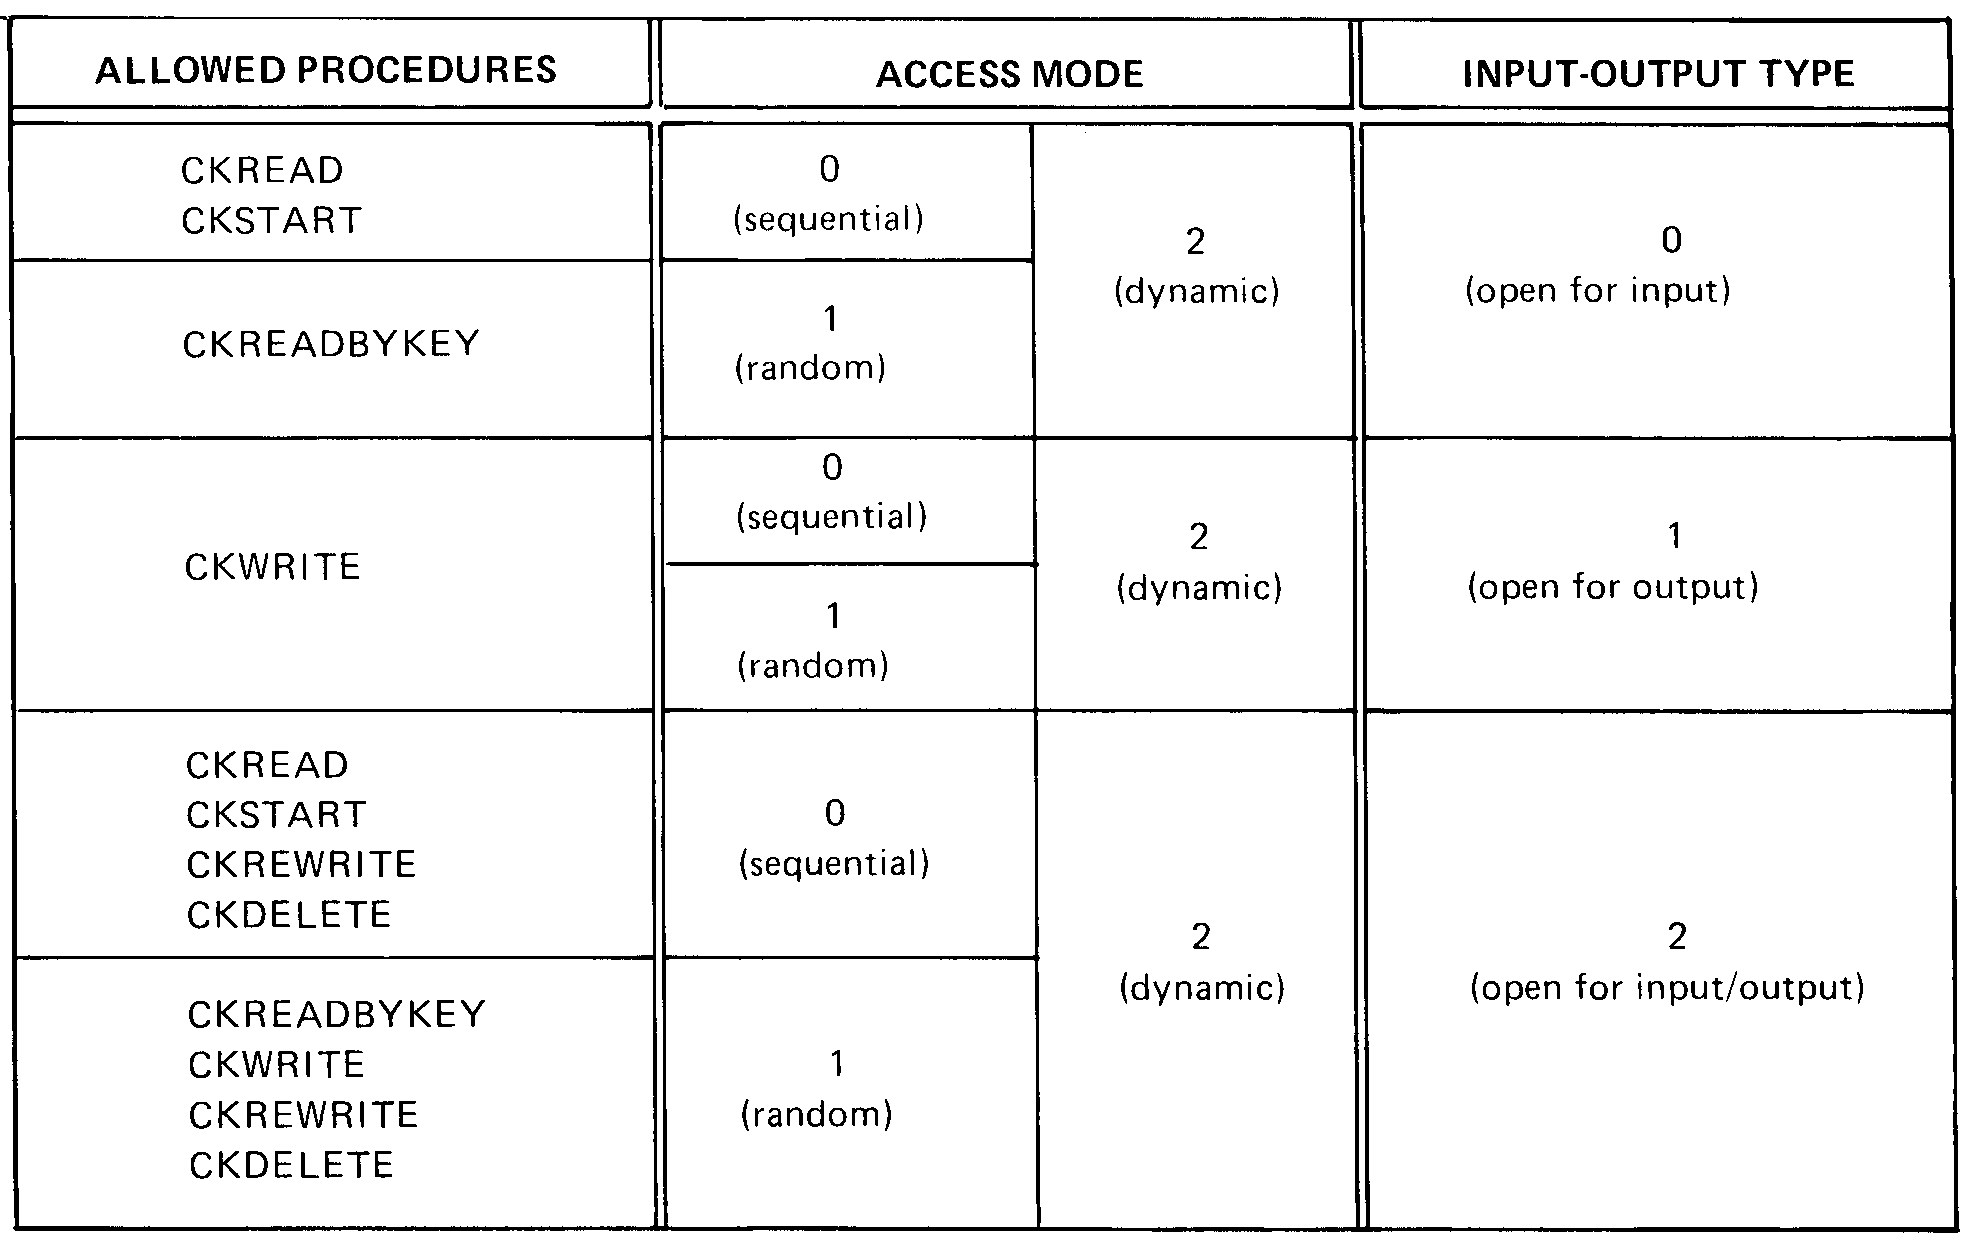 [Procedures Allowed for Input/Output Type/Access Mode Combinations]